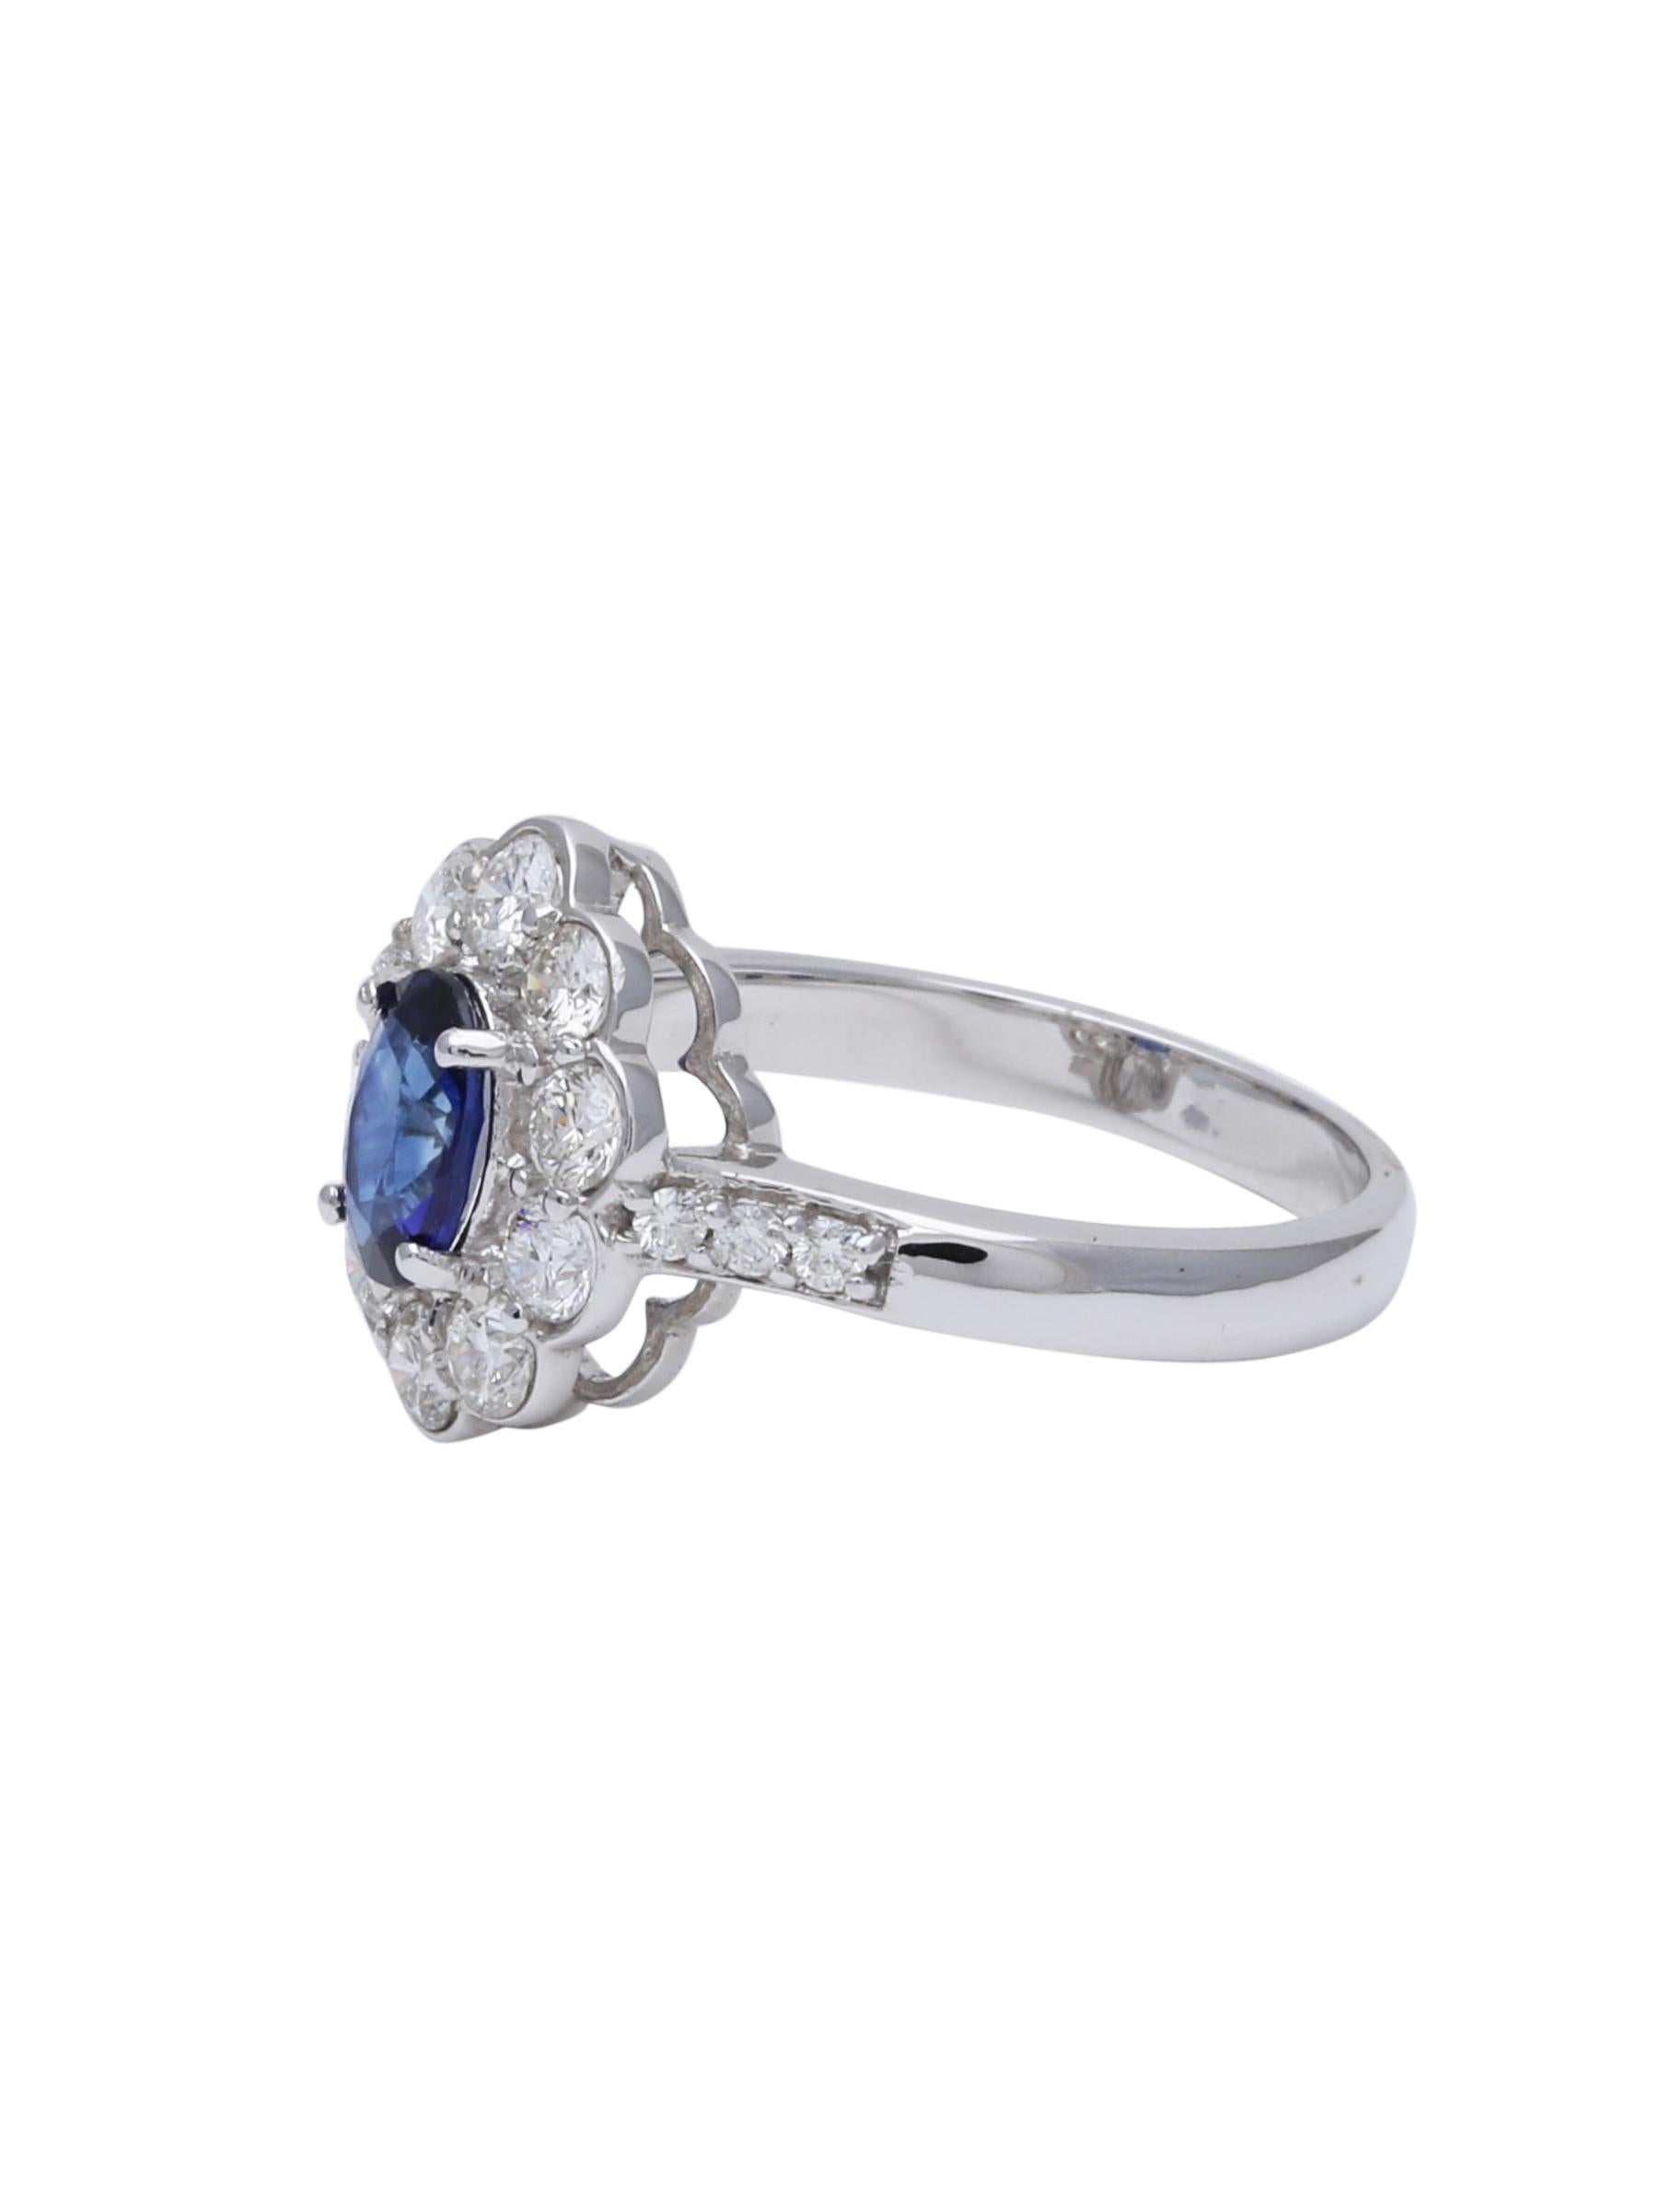 A perfect engagement ring or Anniversary present for her. A beautiful blue Sapphire and Diamond Halo ring set in 18K White Gold. The Blue Sapphire in the ring weighs 0.82 carats and diamonds weigh 0.86 carats. Its one of the oldest yet the classiest